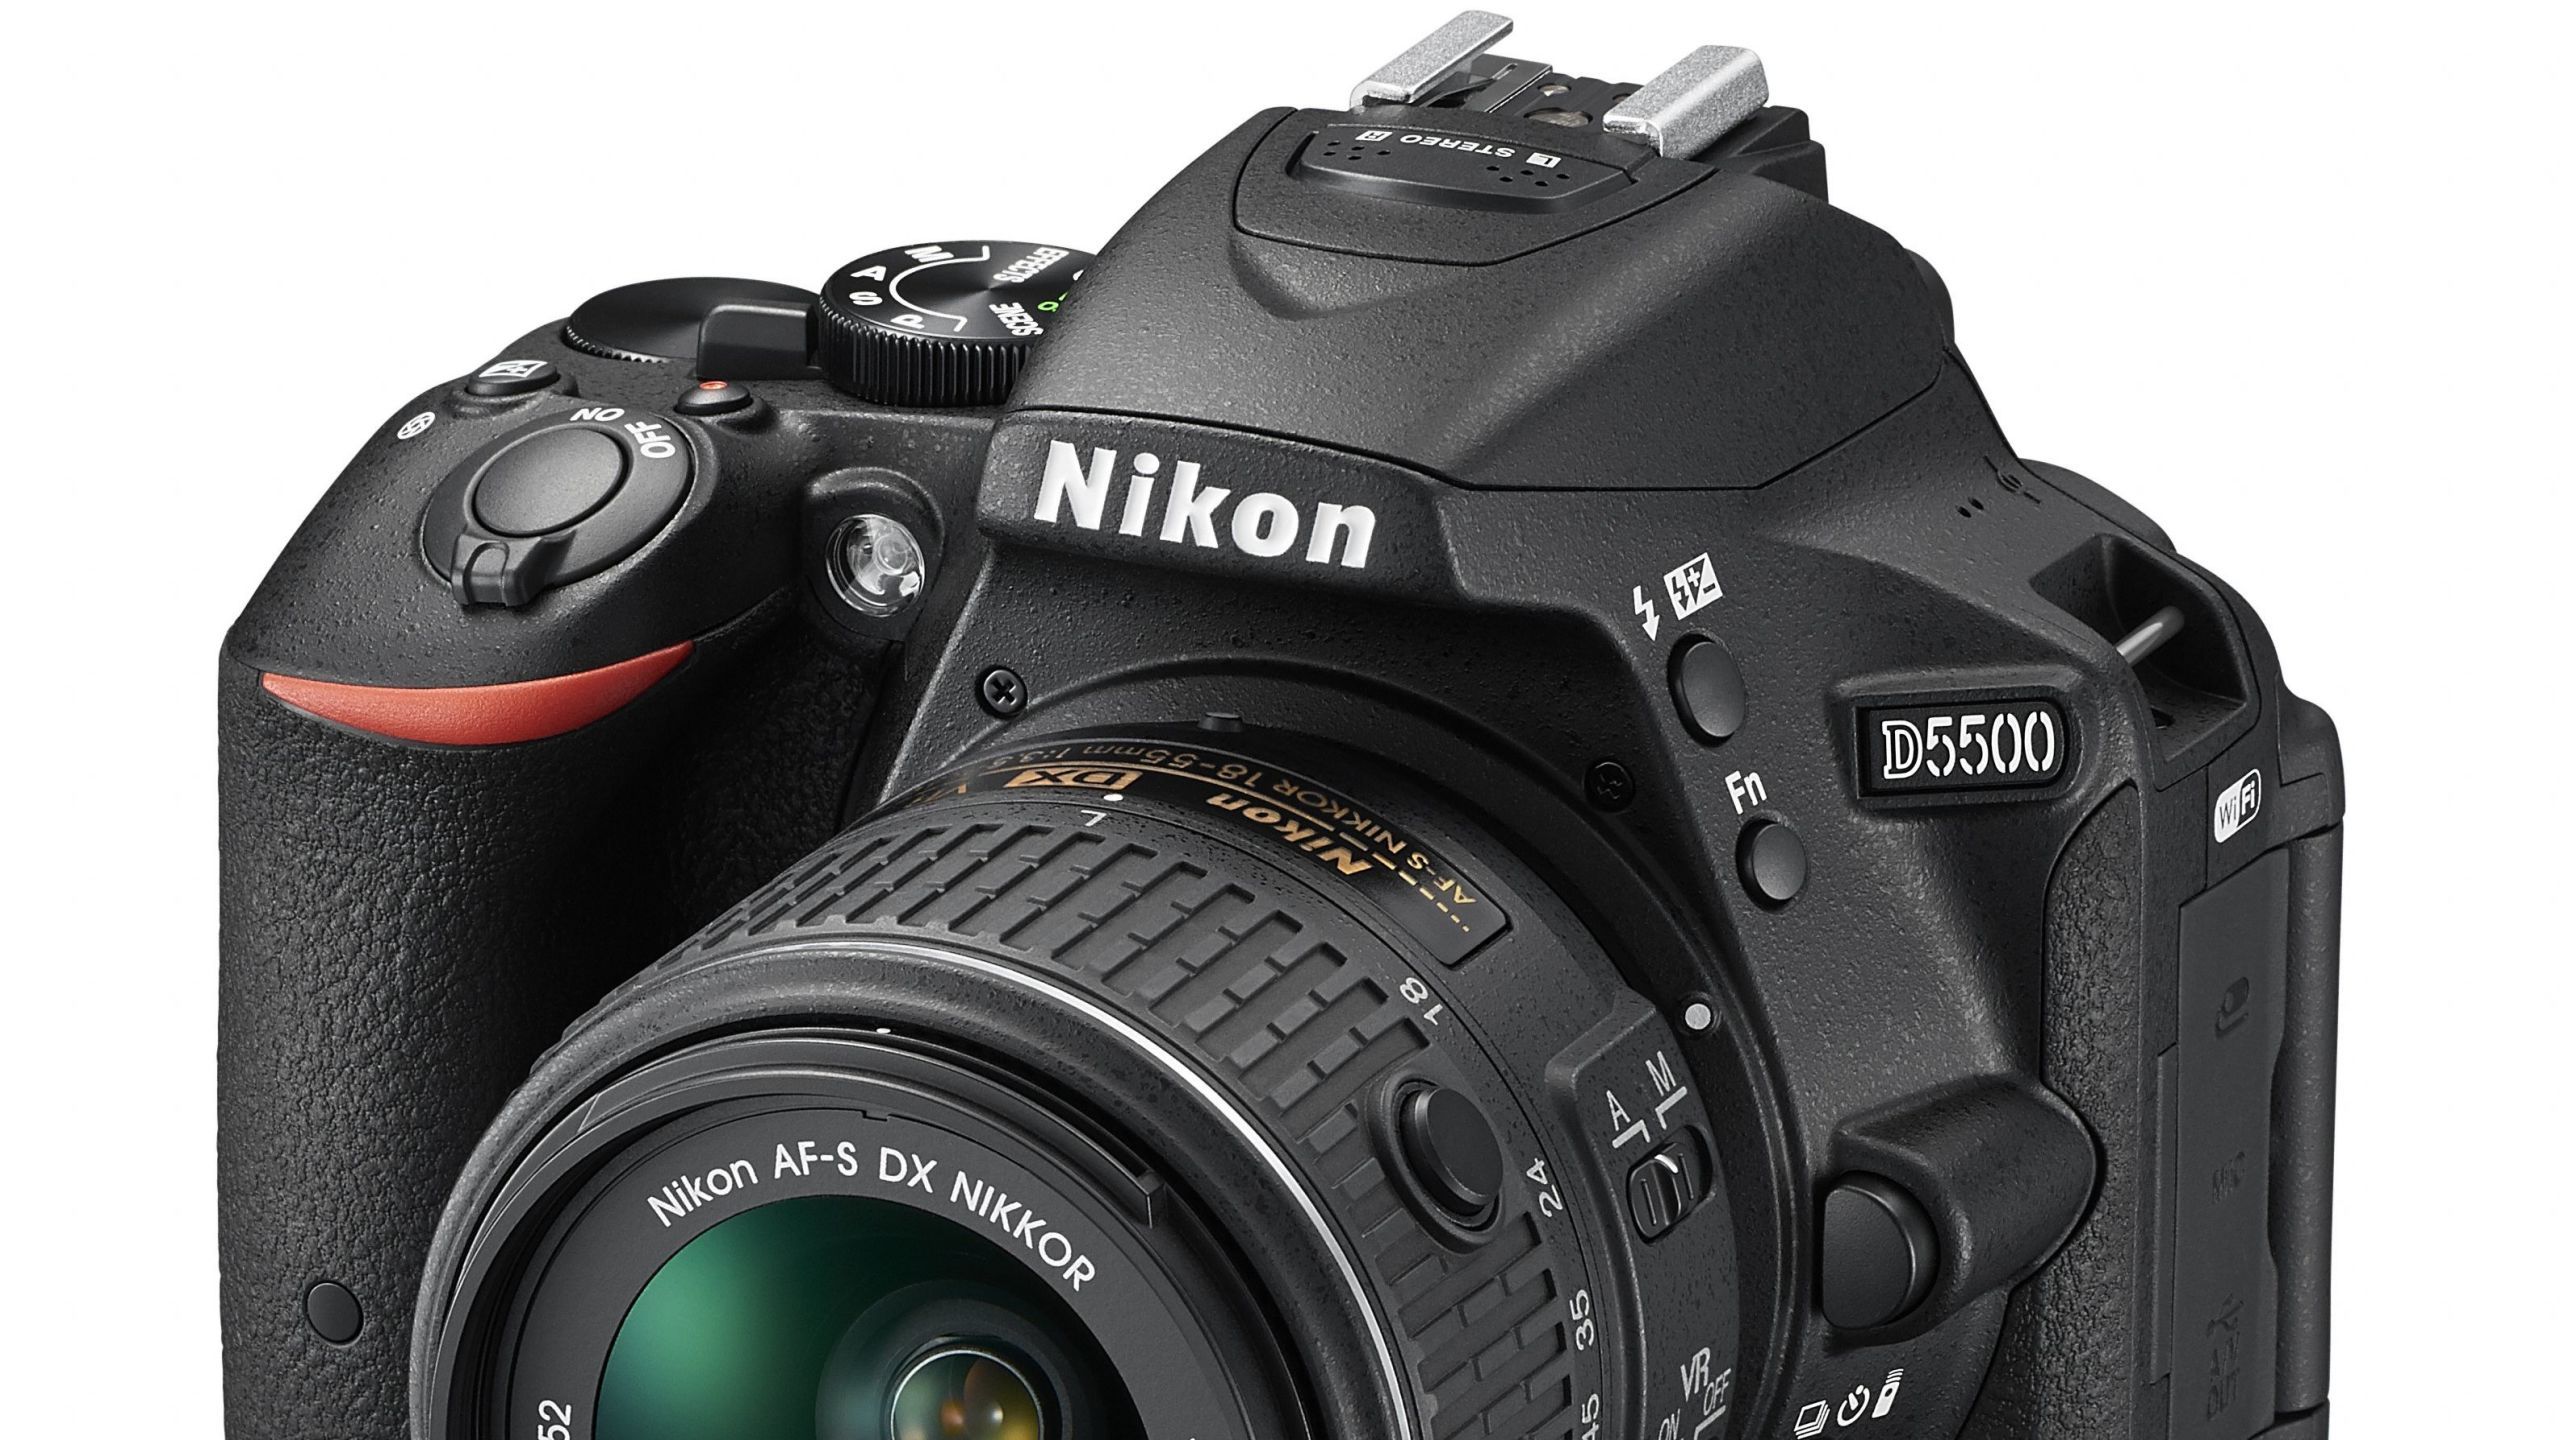 Nikon D5500 Camera with 18-55mm VR II Lens Kit Review, Price and 